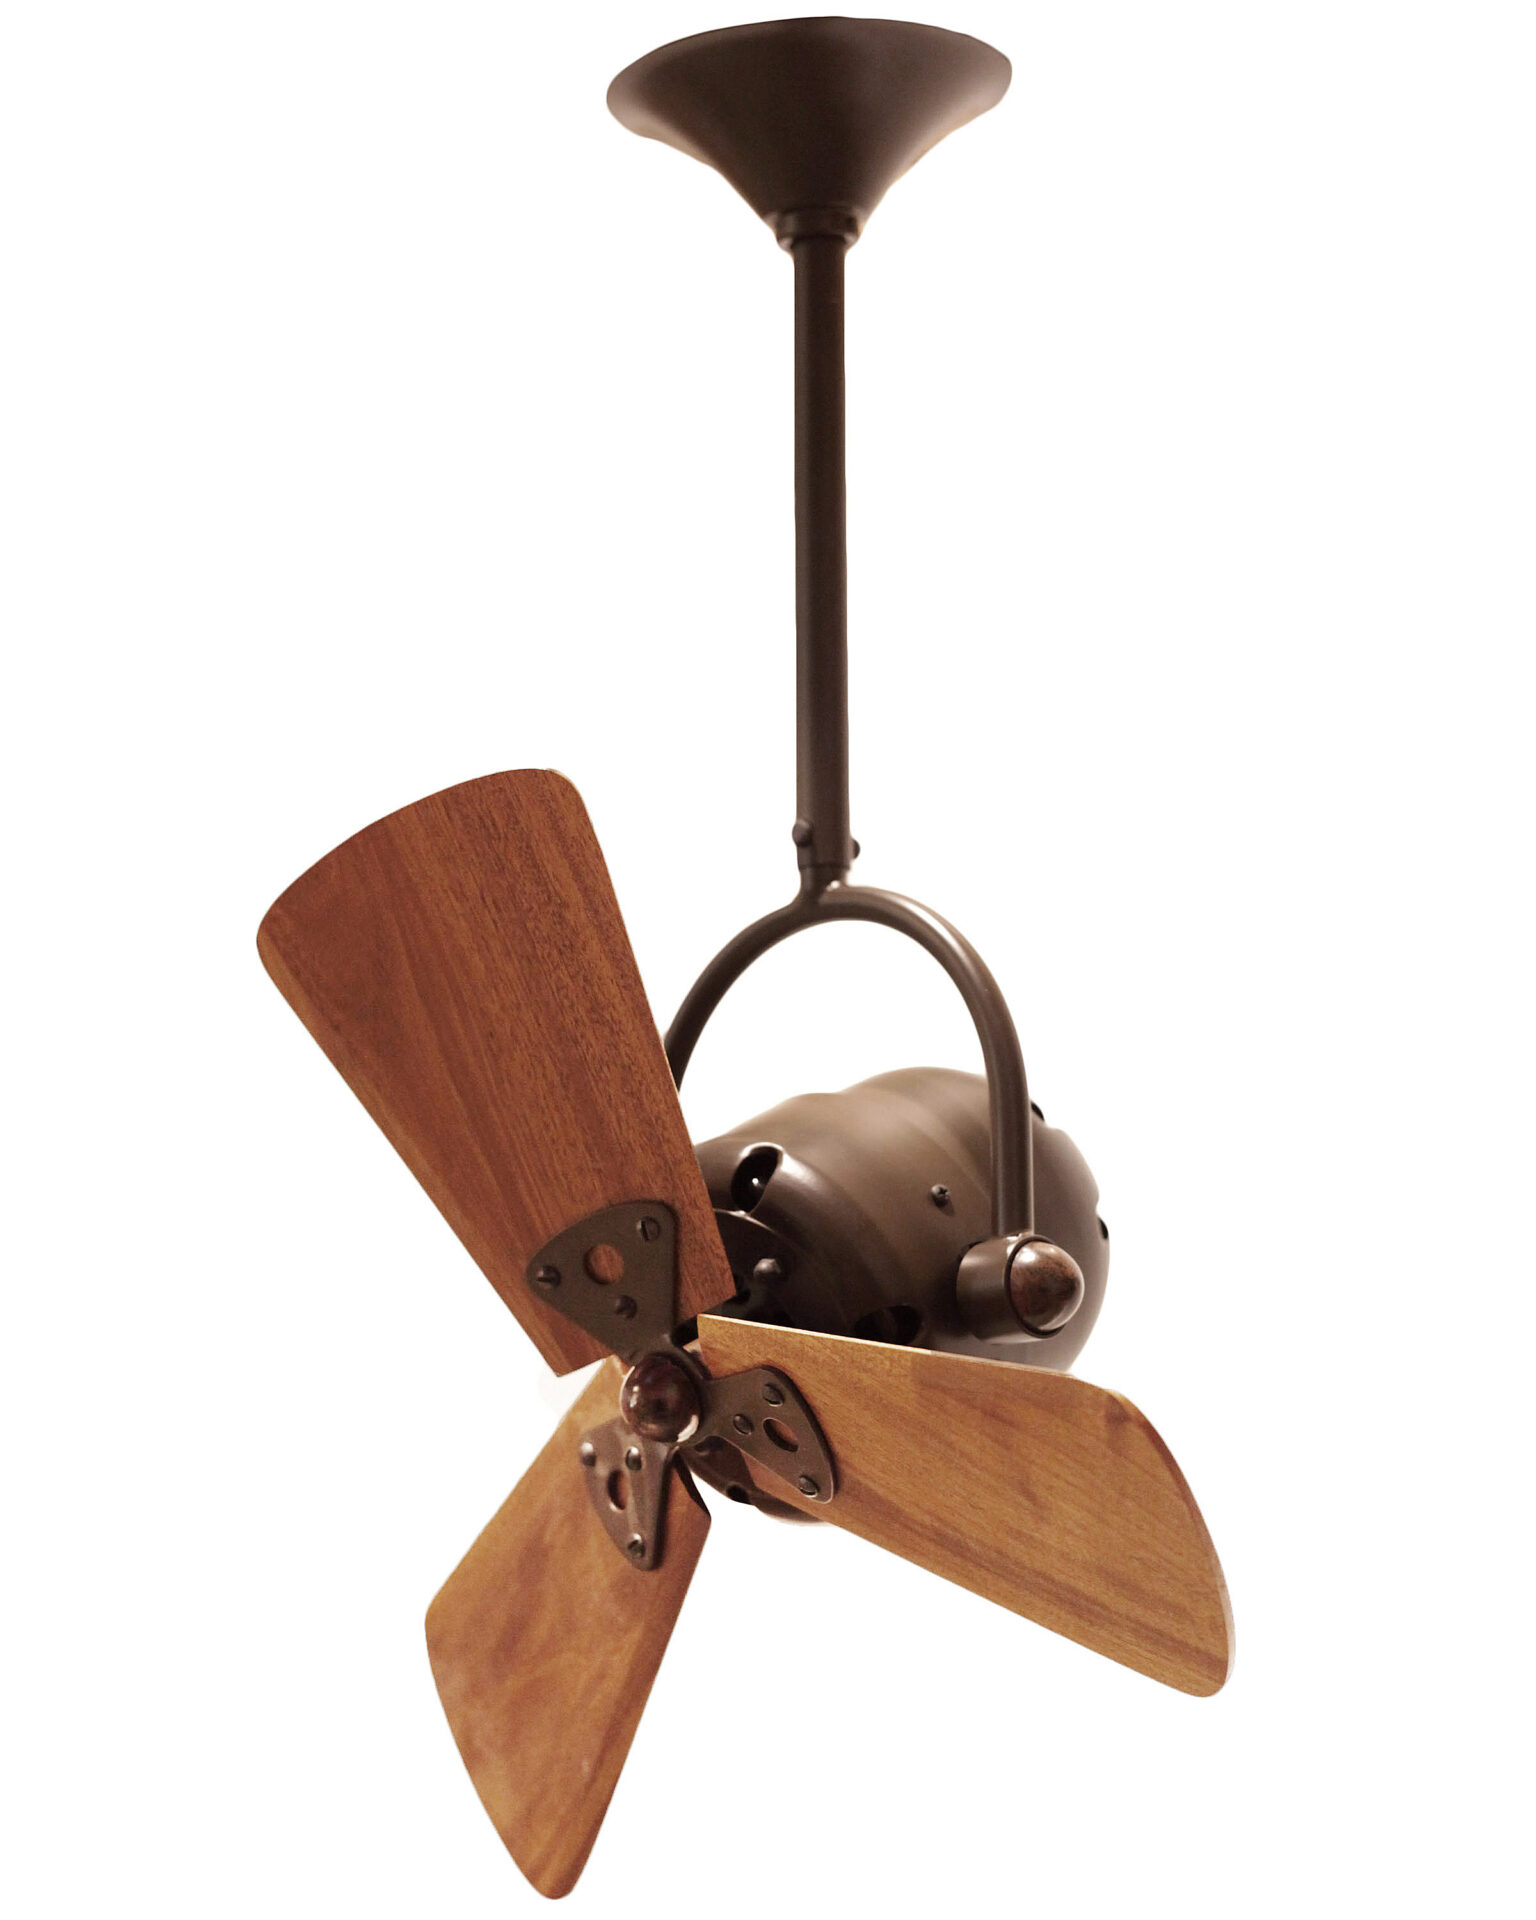 Bianca Direcional ceiling fan in Bronzette with Mahogany wood blades made by Matthews Fan Company.